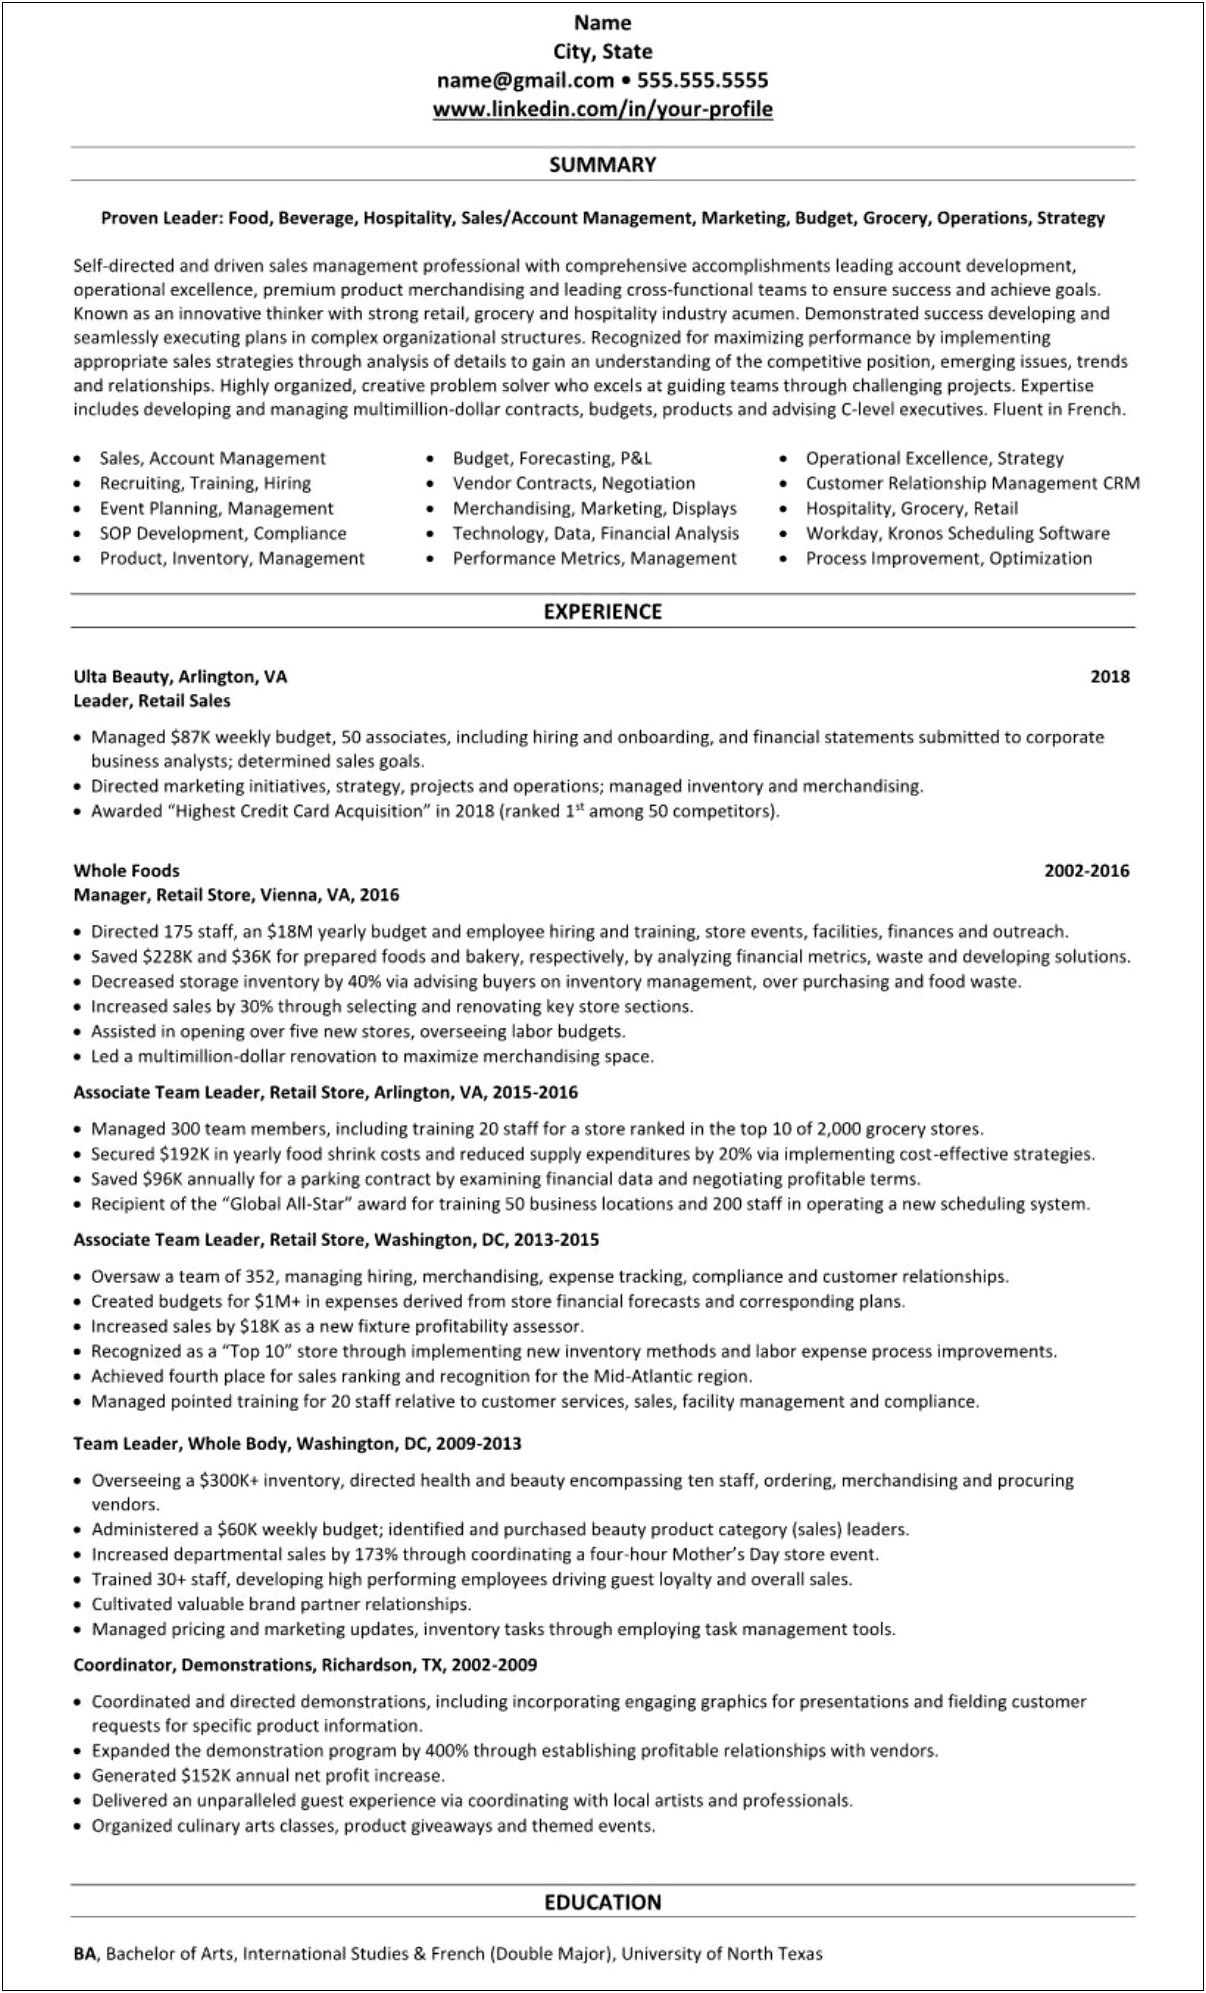 Employee Food Store Description For Resume